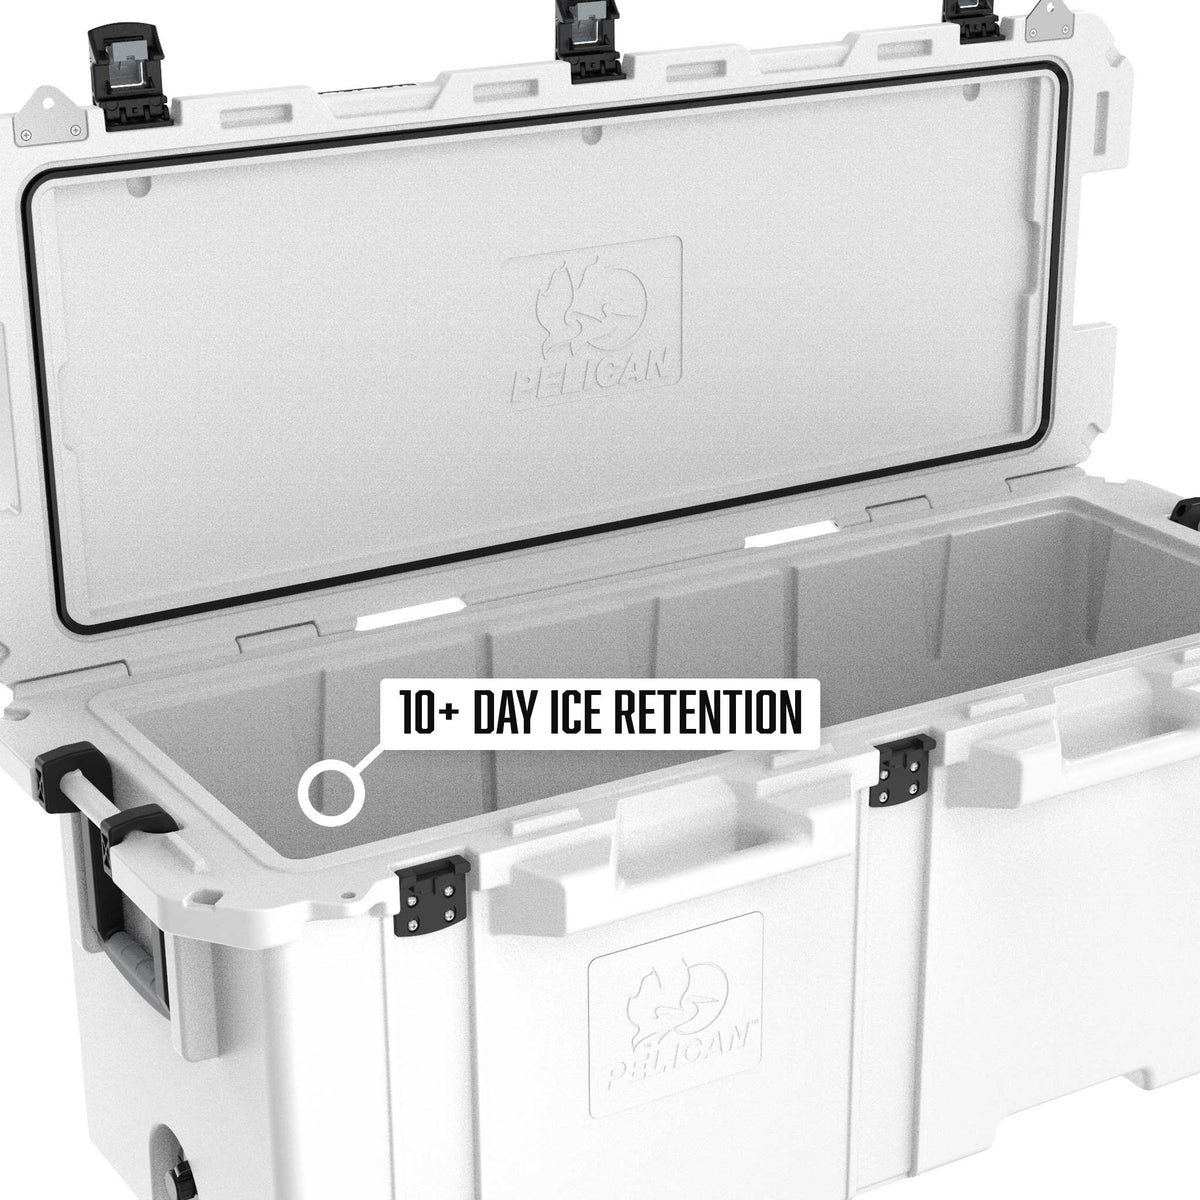 Pelican™ 250QT Elite Cooler comes with 10+ days of ice retention 